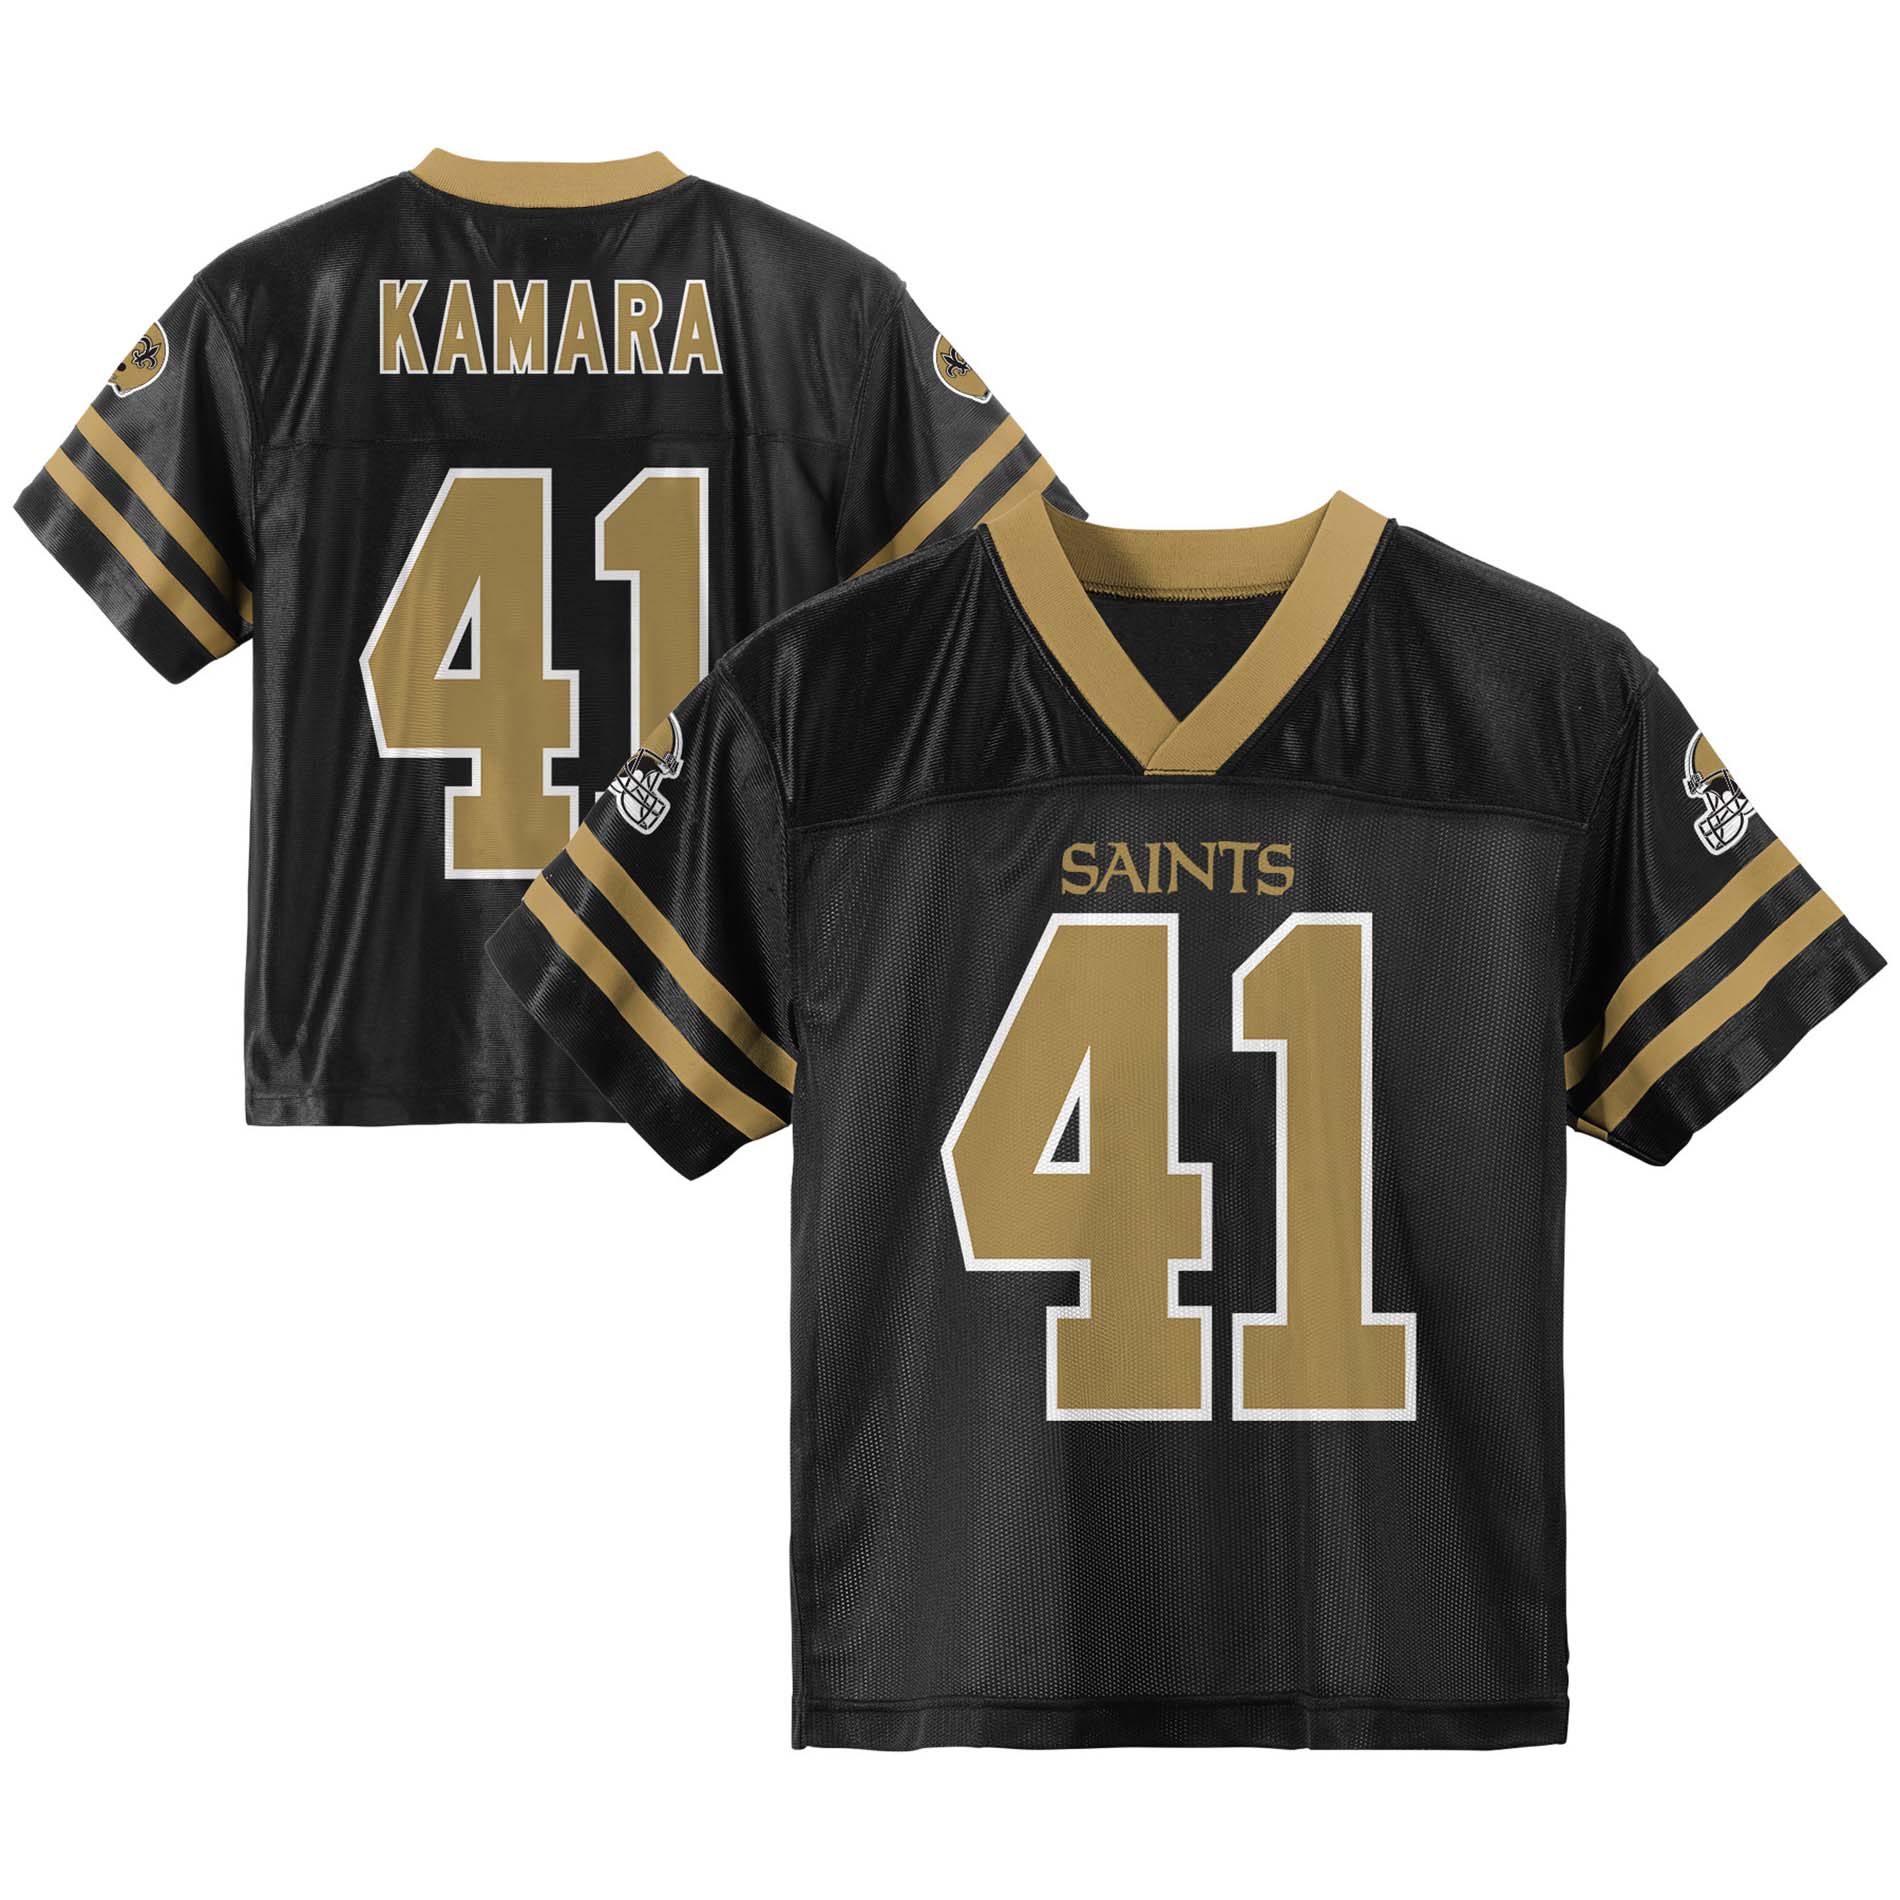 where can i get a saints jersey